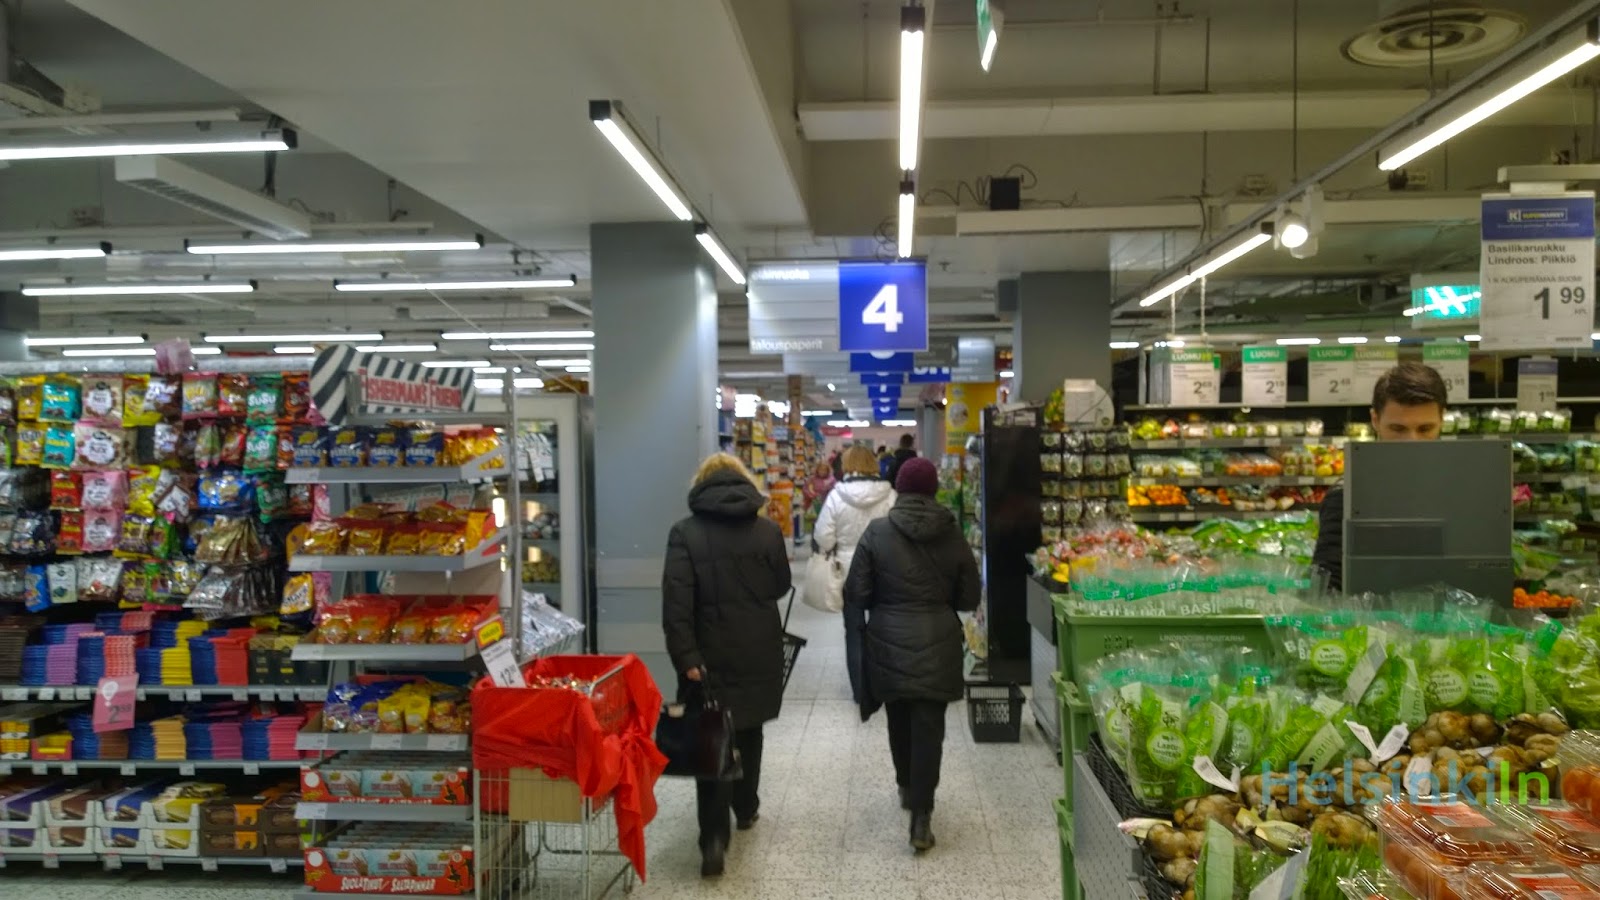 prices in Finnish supermarkets are going down